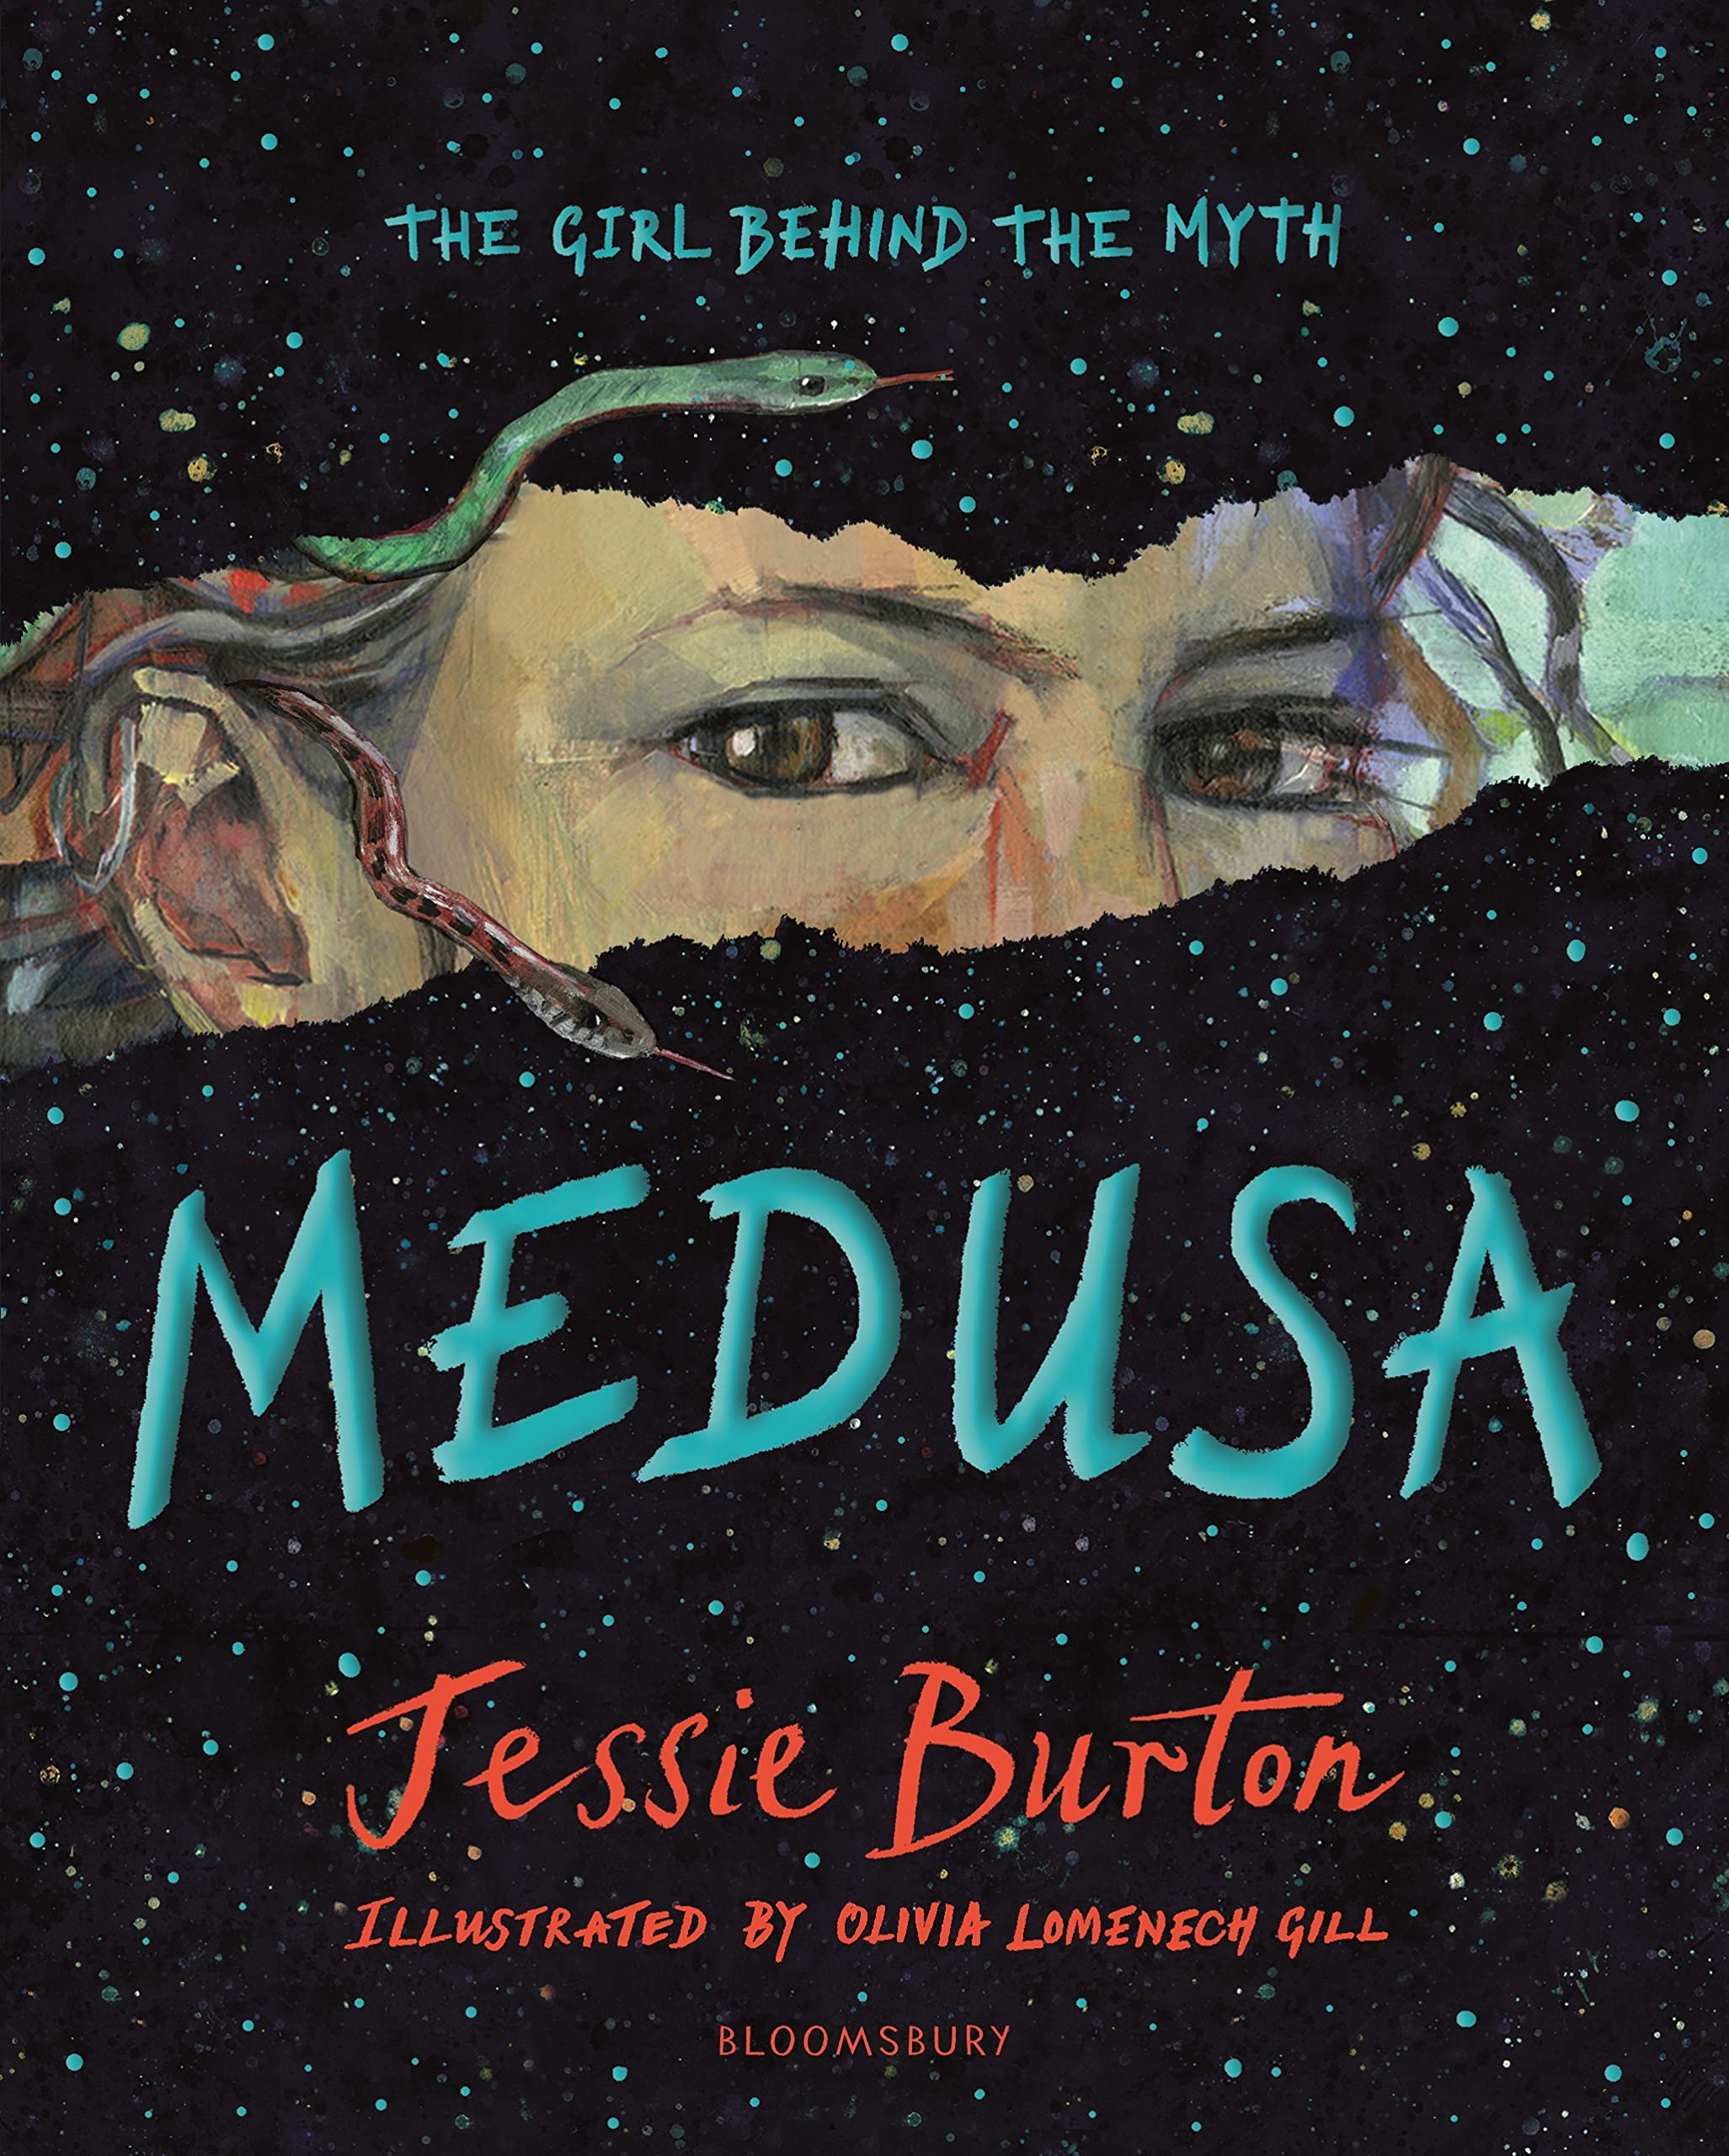 cover of the young adult book "medusa" by Jessie Burton with illustrations by Olivia Lomenech Gill